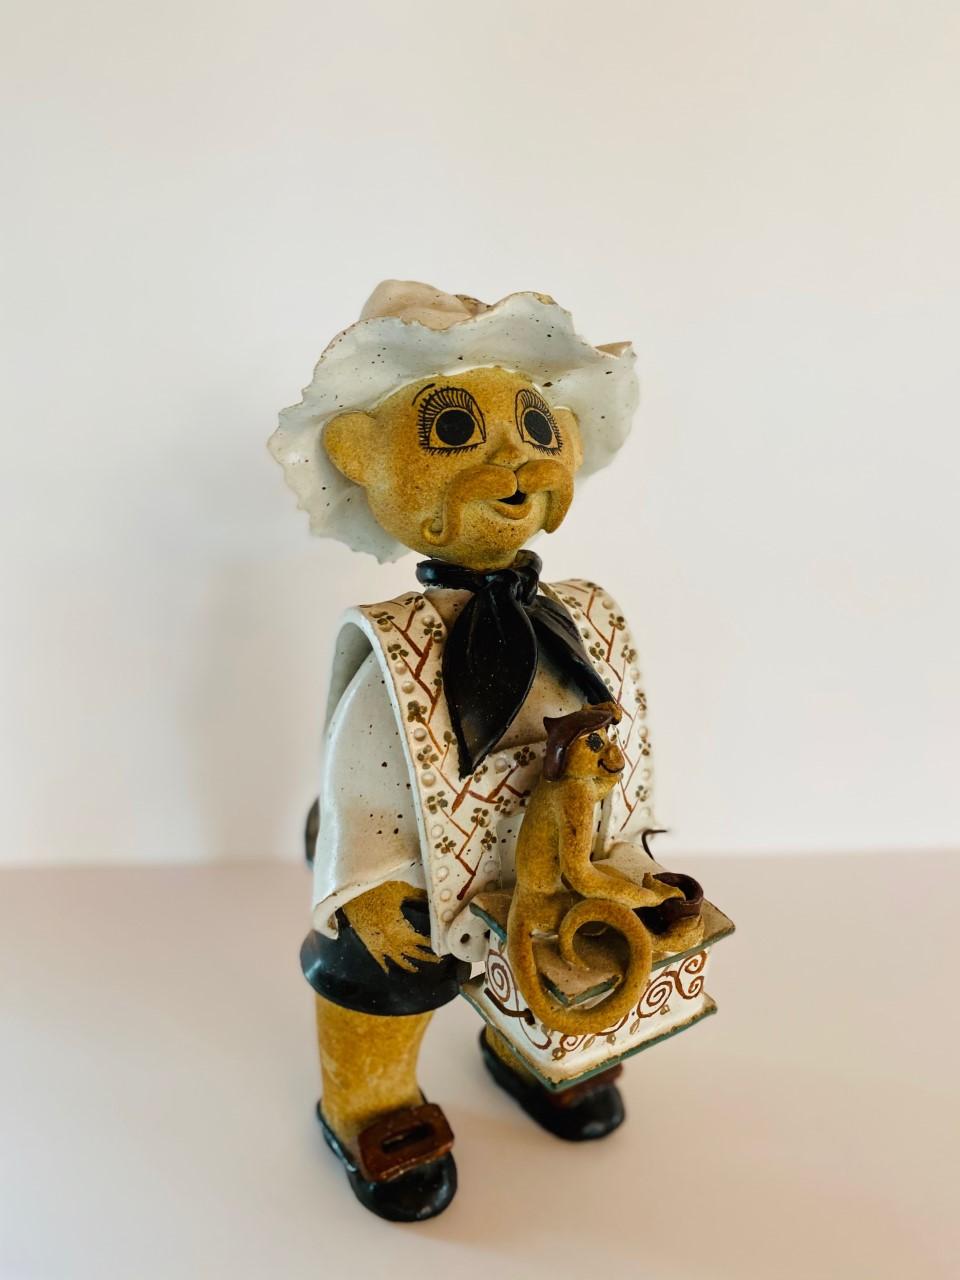 Beautifully rendered ceramic figure of man with musical grinding box and monkey. The detail and execution of this ceramic piece, made by hand is outstanding. The figure renders details (feather in hat, buttons in the back, and monkey figure